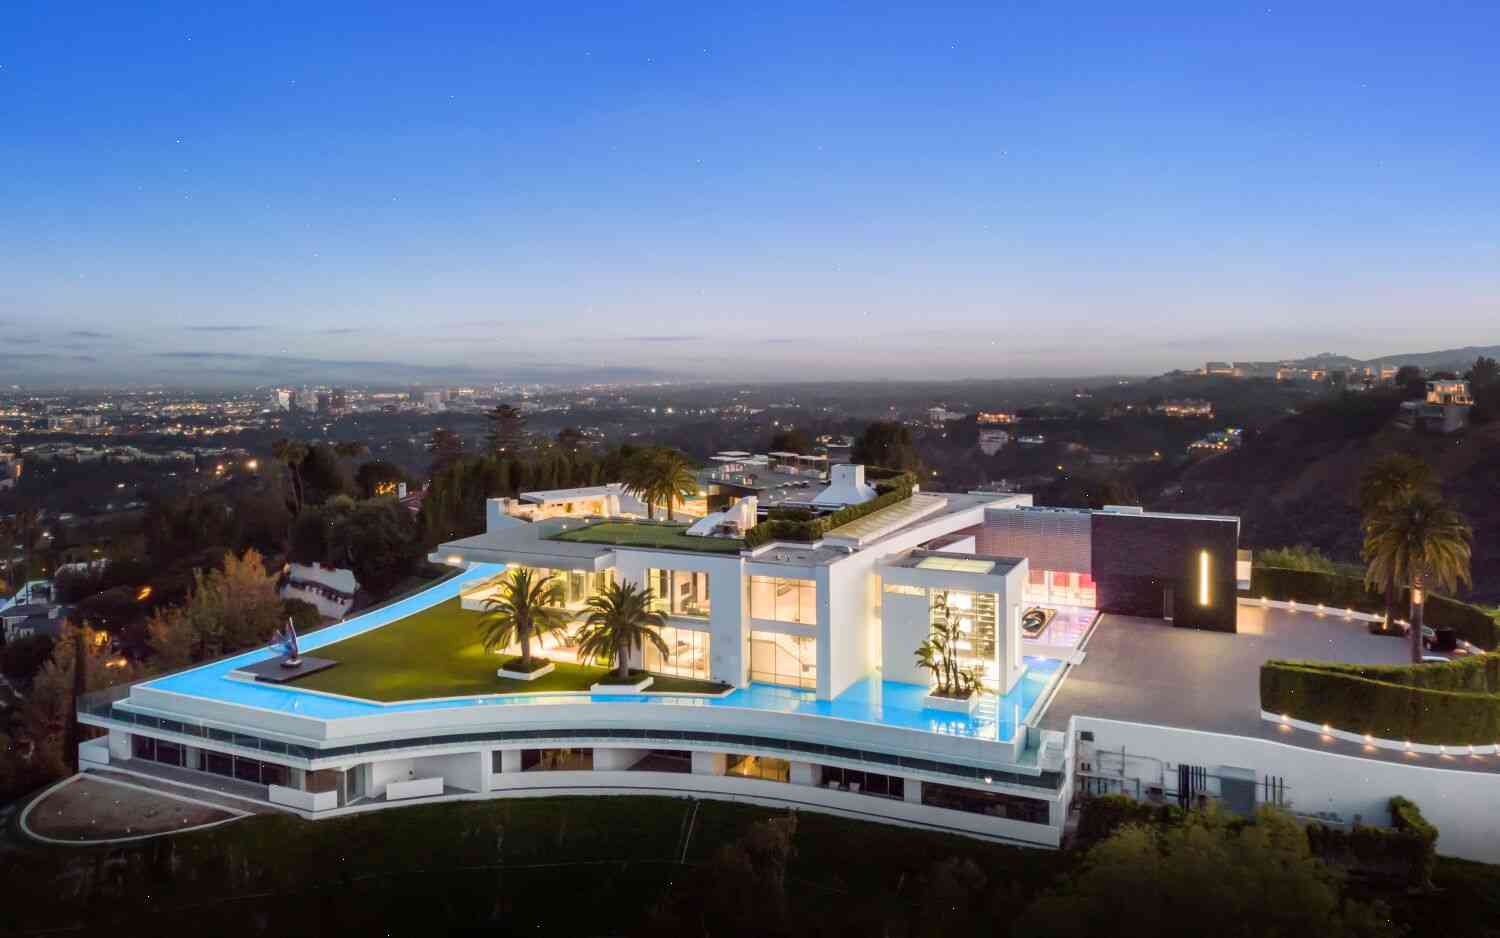 The Average Cost of Cooling Los Angeles' Highest-Priced Executives' Homes